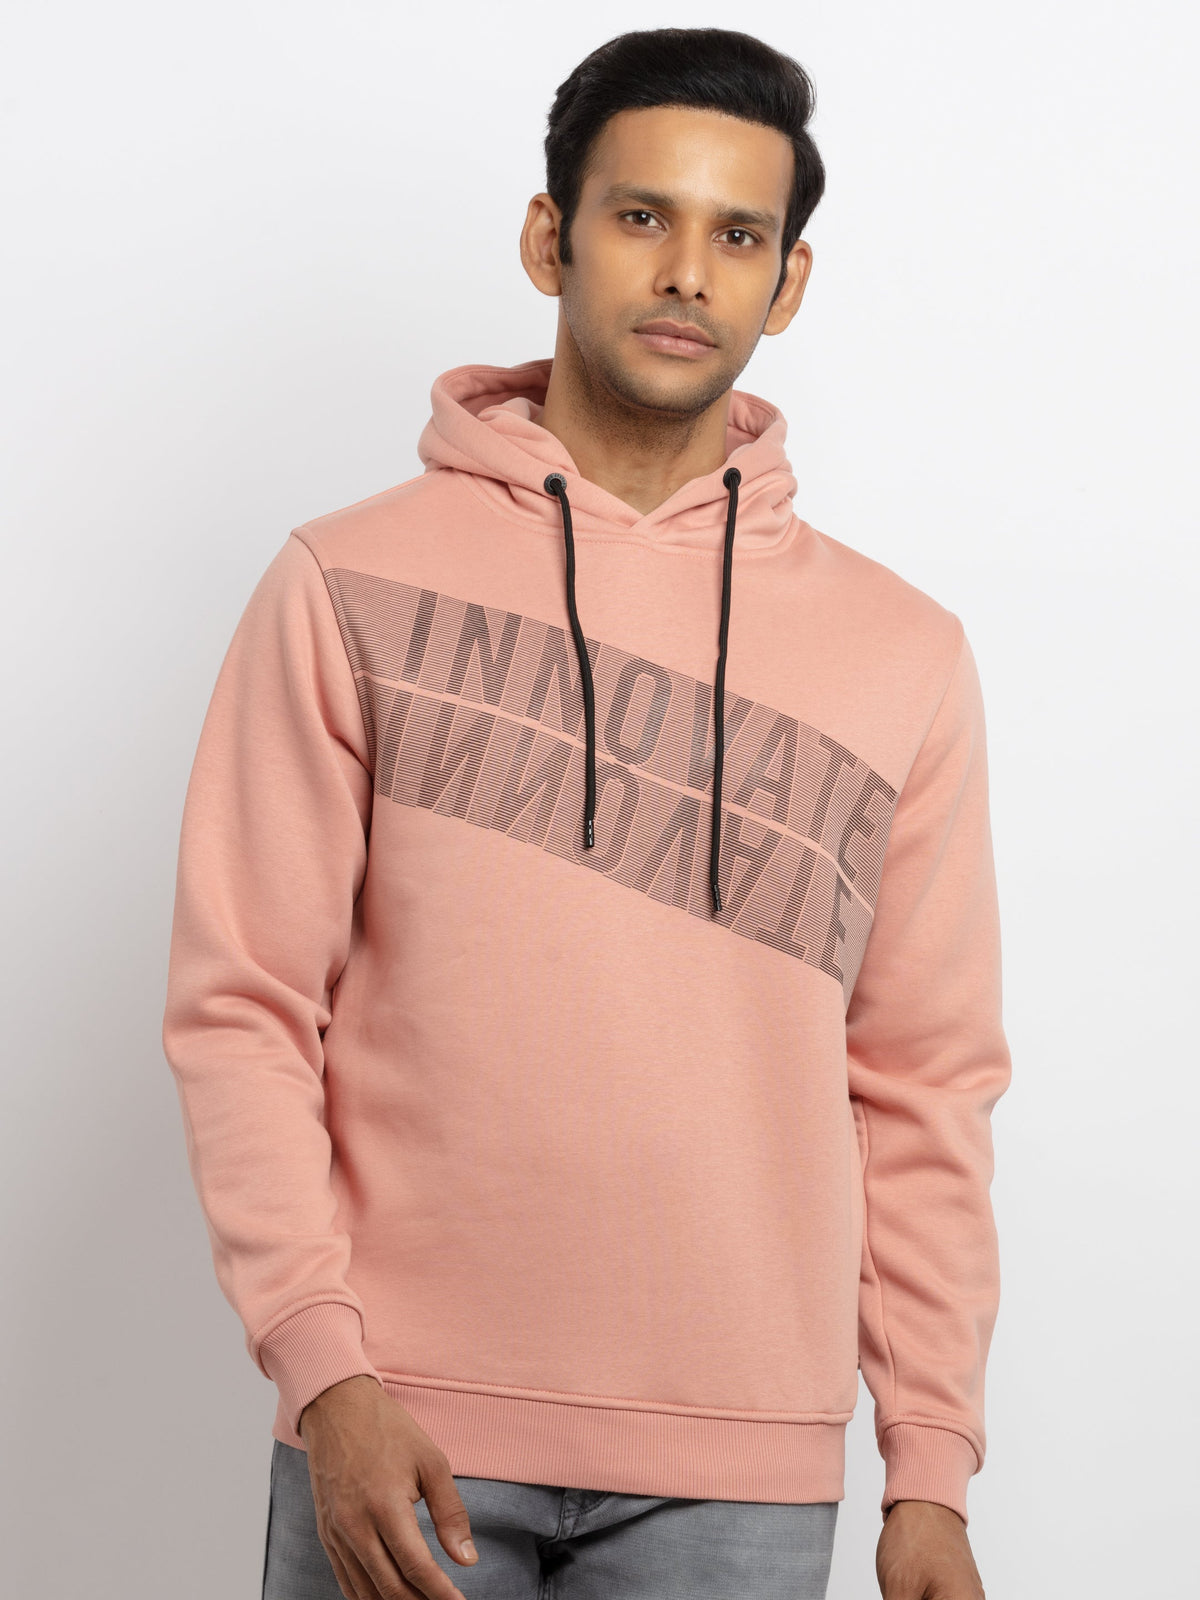 hoodies for plus size